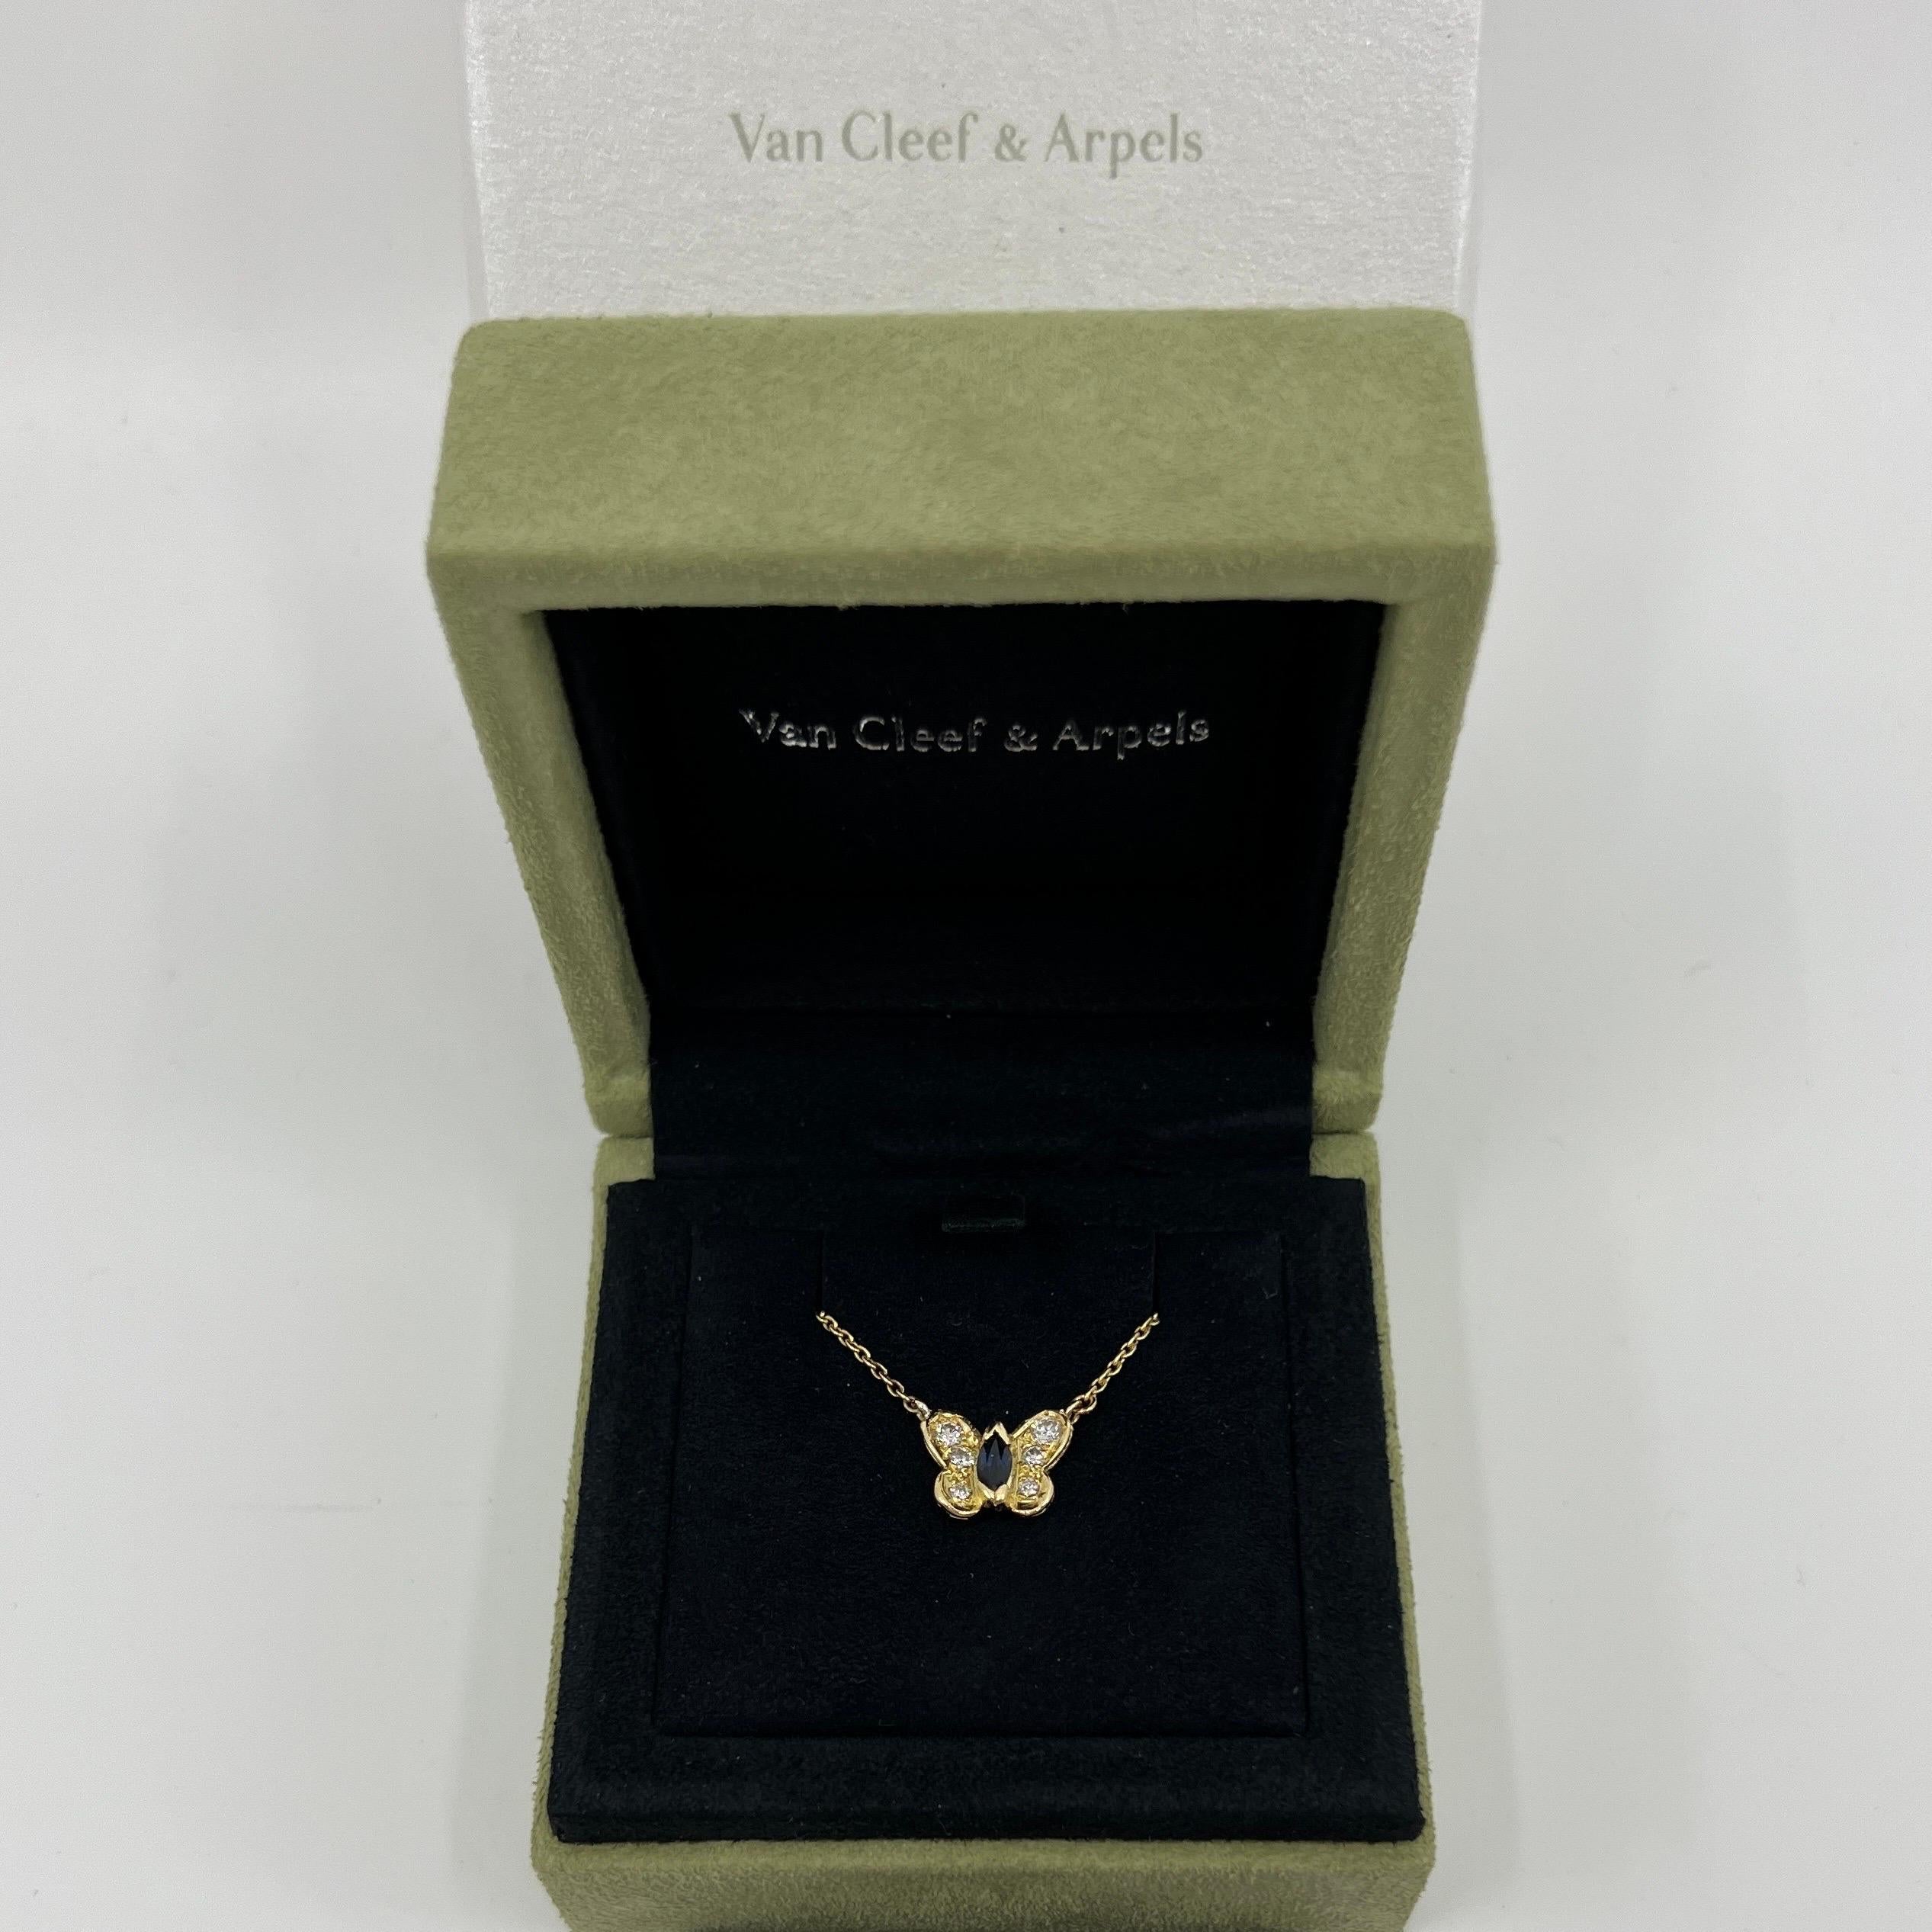 Vintage Van Cleef & Arpels Papillion Blue Sapphire & Diamond 18k Gold Butterfly Pendant Necklace.

A beautiful and rare vintage piece with a stunning marquise cut deep blue sapphire and 6 excellent quality diamonds. VS-VVS clarity. F-H colour
All